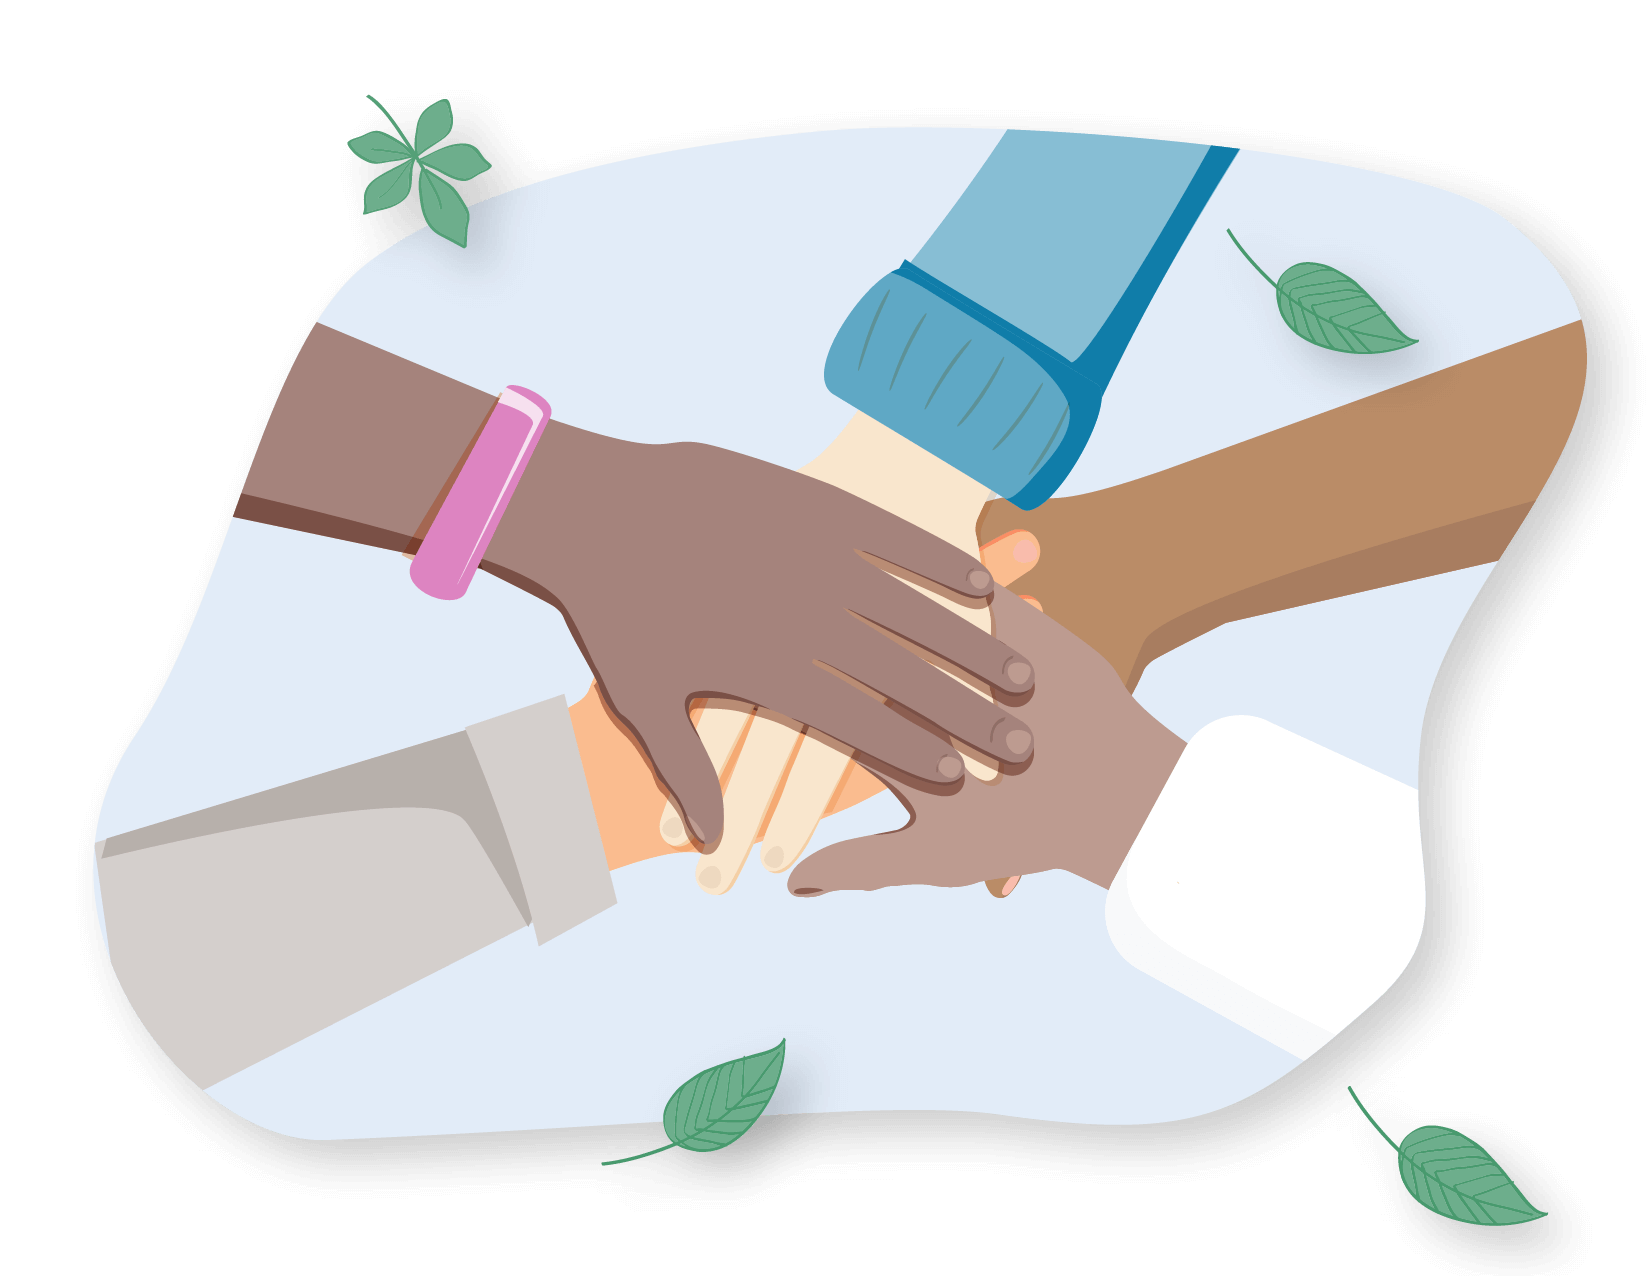 Illustration of young people putting their hands together